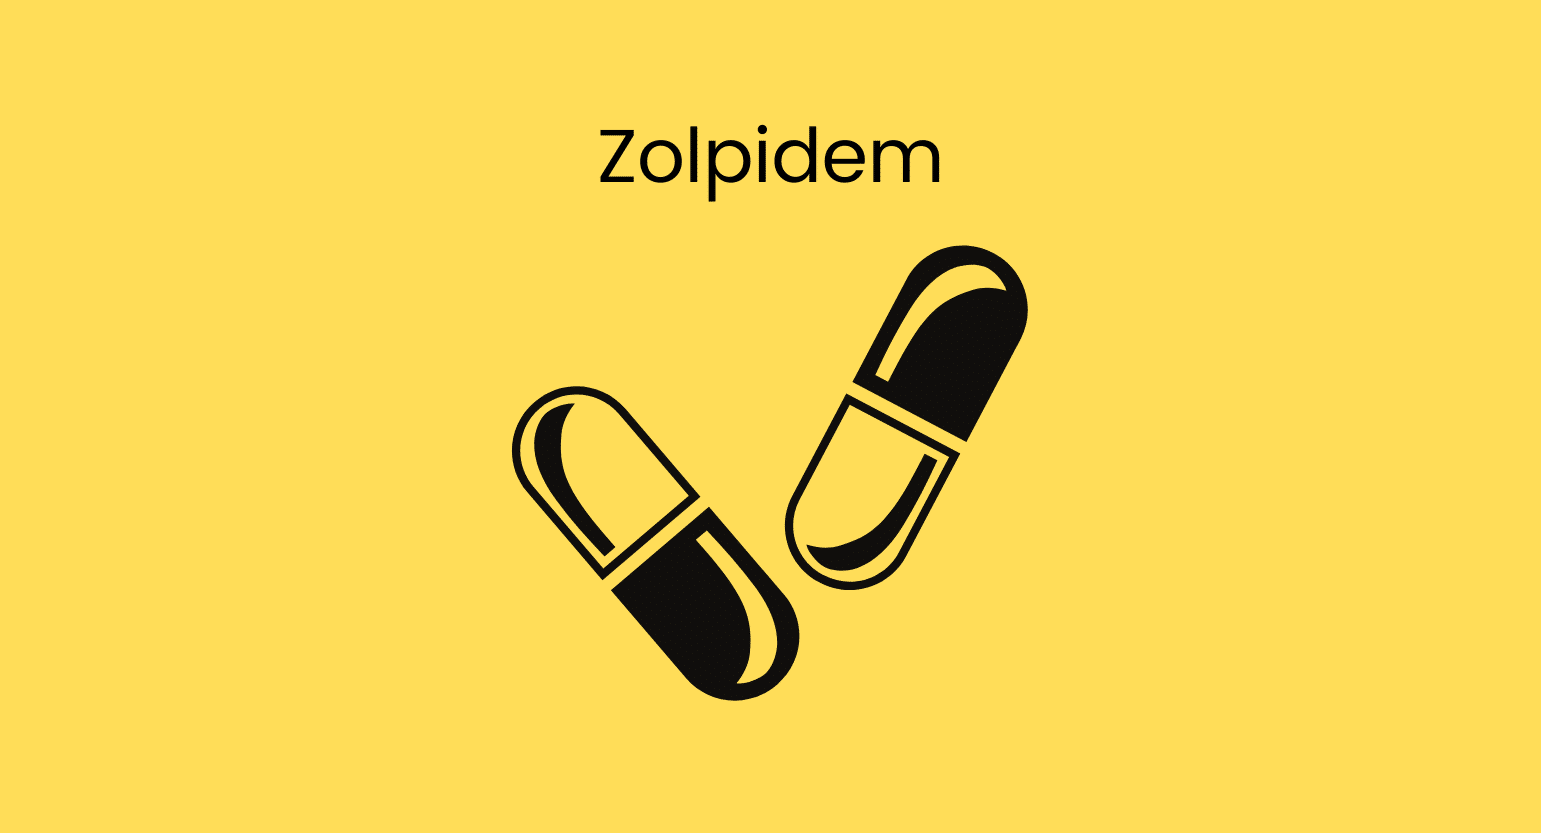 What Happens If You Mix Kratom & Zolpidem (Ambien)?